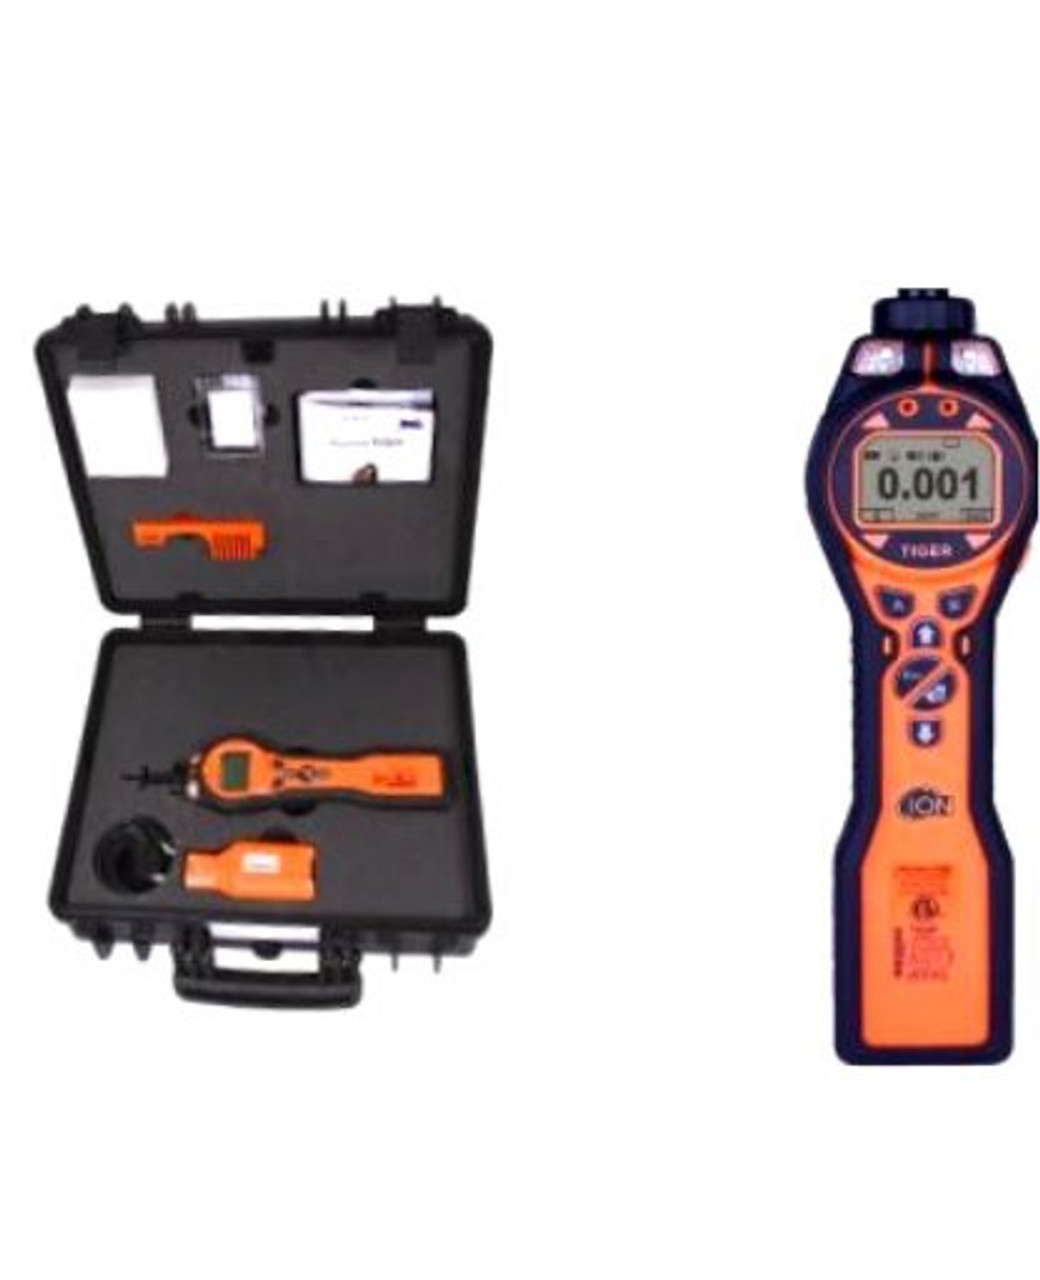 TIGER HANDHELD VOC DETECTOR IN CASE (KIT). *Additional  (secondary) Rechargeable Battery not included. Tiger Kit comes with QTY OF 1 Rechargeable Battery. Additional batteries sold separately. 